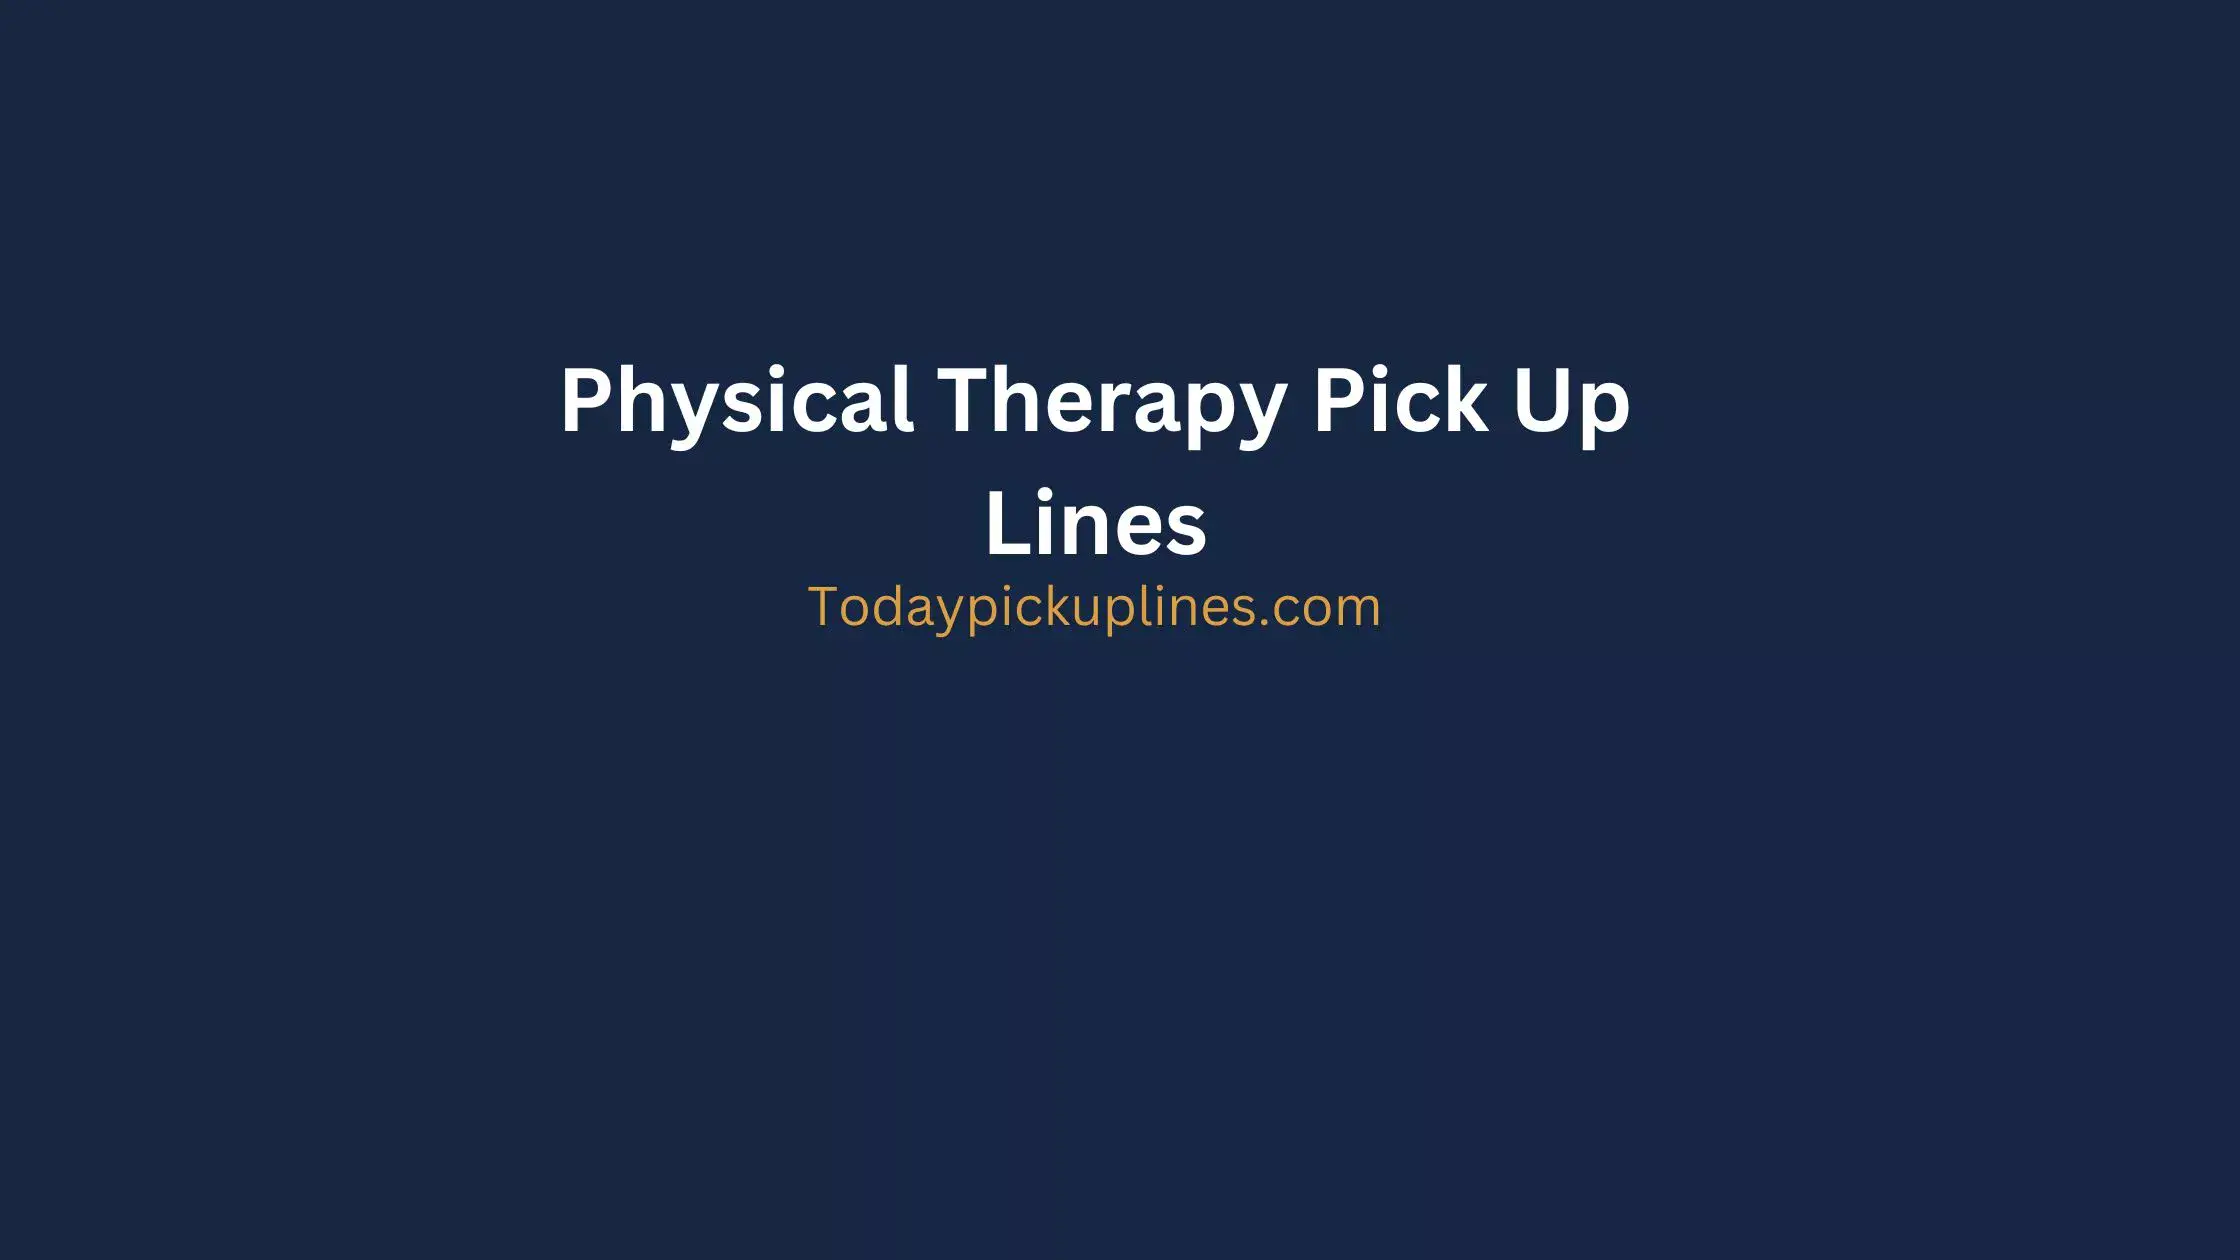 Physical Therapy Pick Up Lines